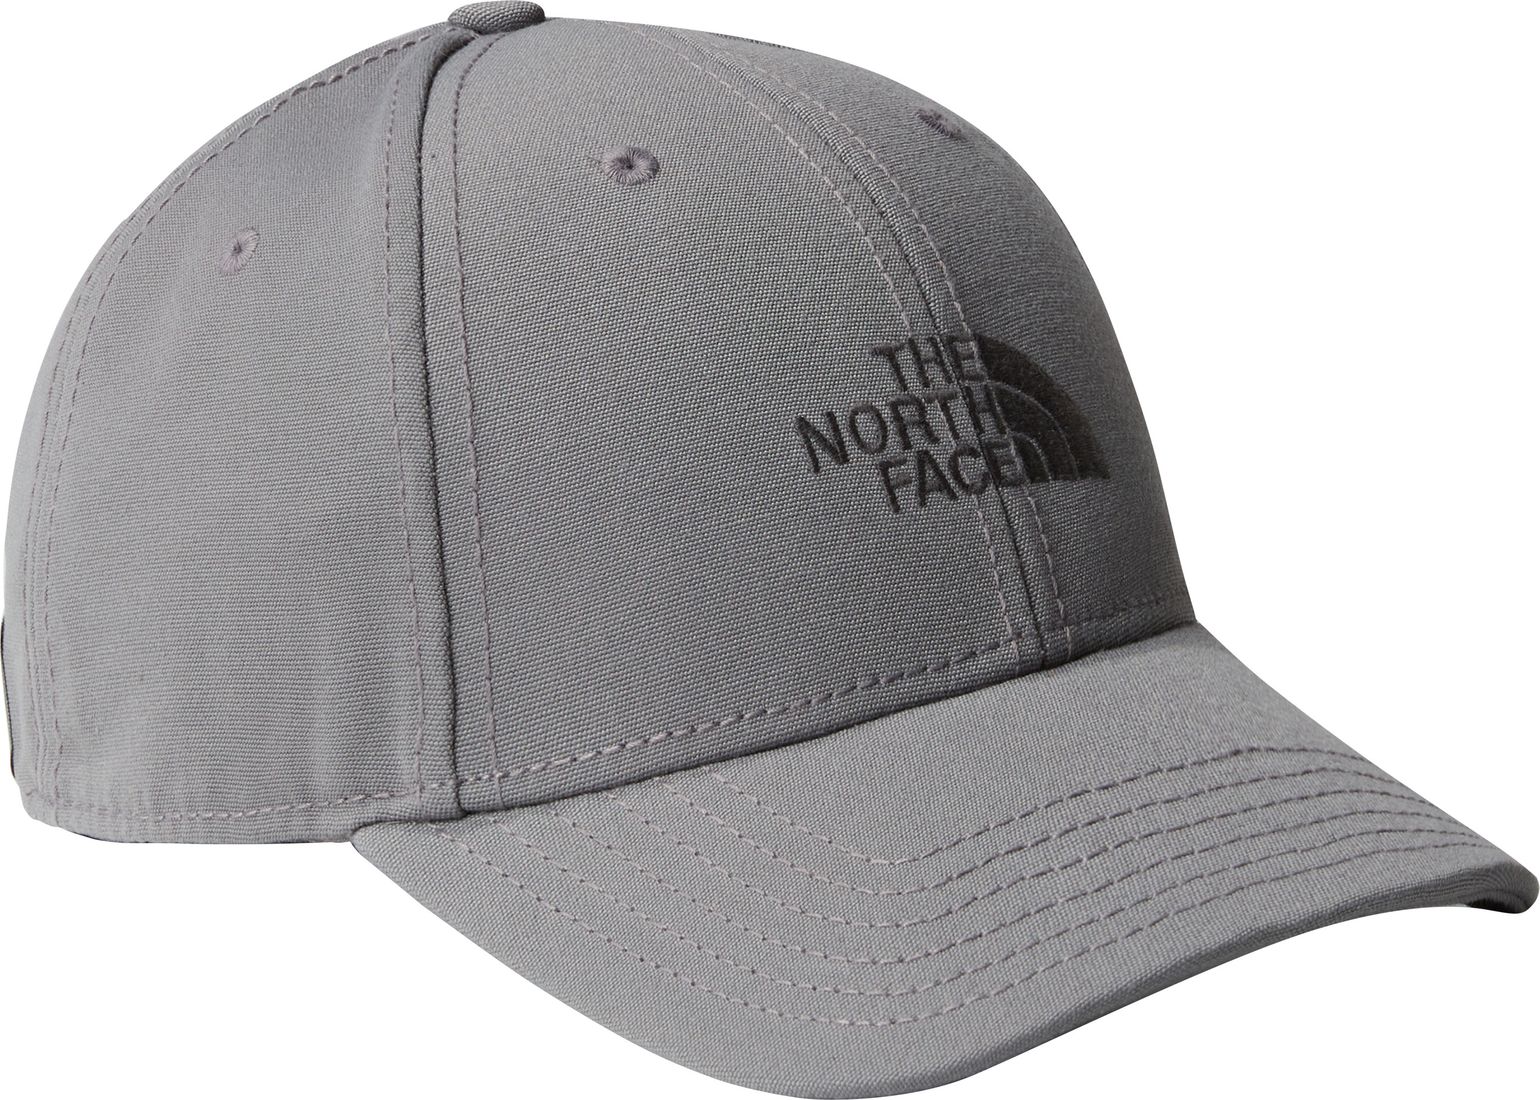 Recycled '66 Classic Hat Smoked Pearl/Asphalt Gr